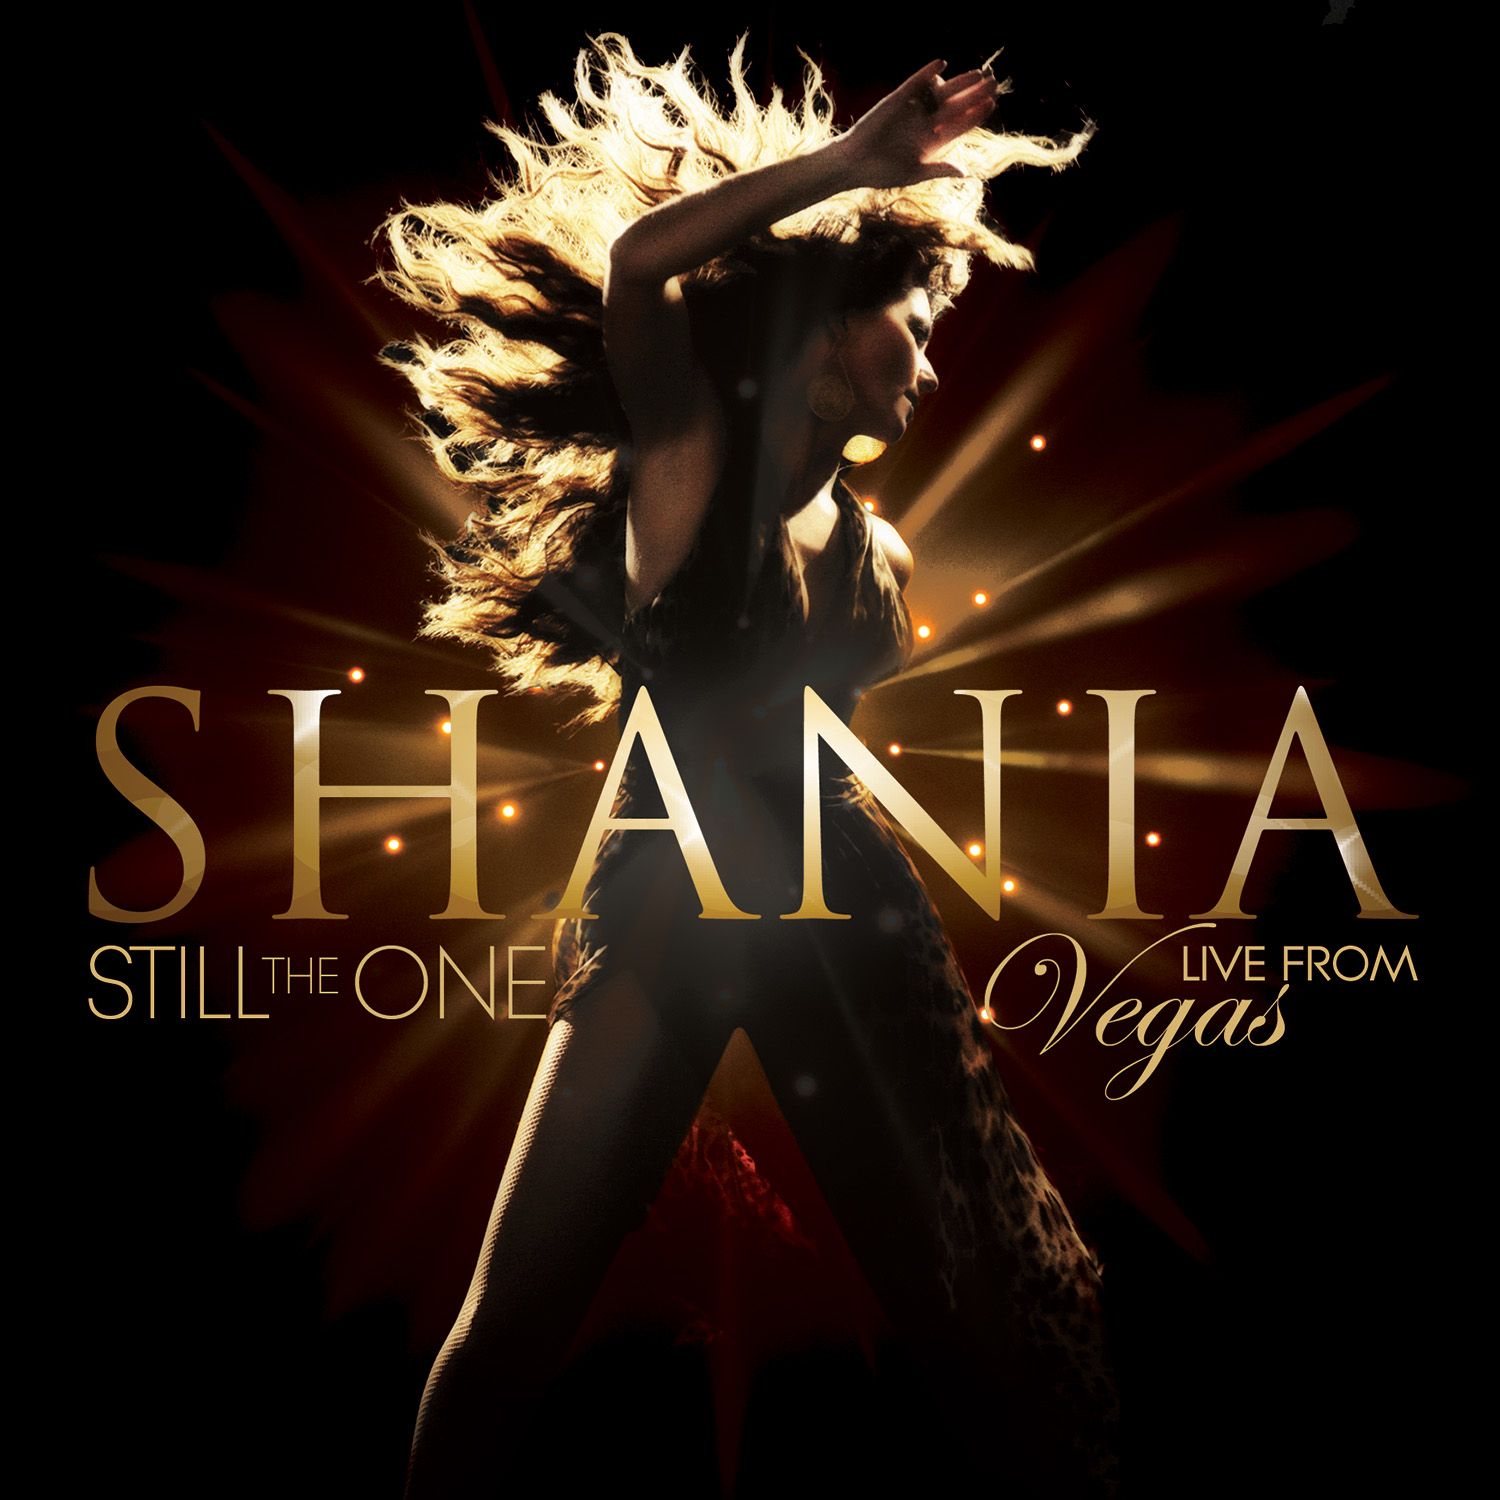 “SHANIA: STILL THE ONE LIVE FROM VEGAS” AIRS FEBRUARY 28 ON ABC